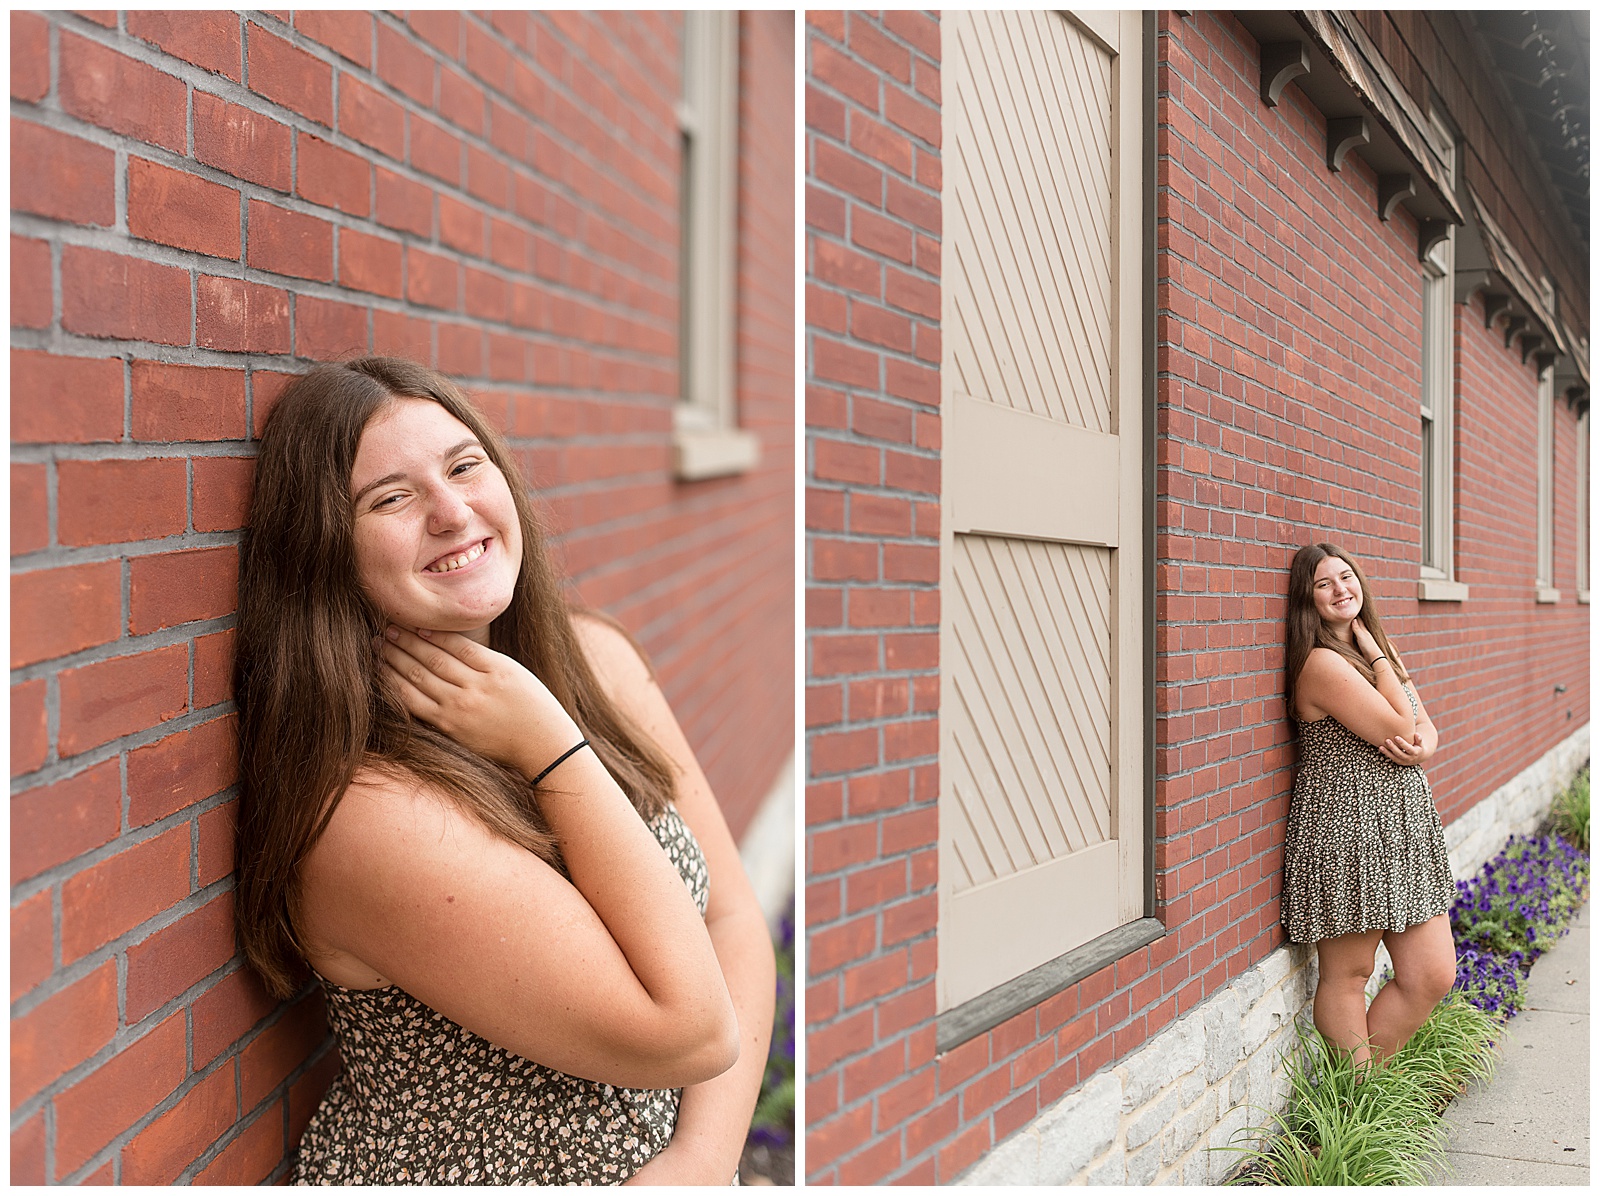 senior girl leaning against brick building with right hand resting against her neck as she smiles